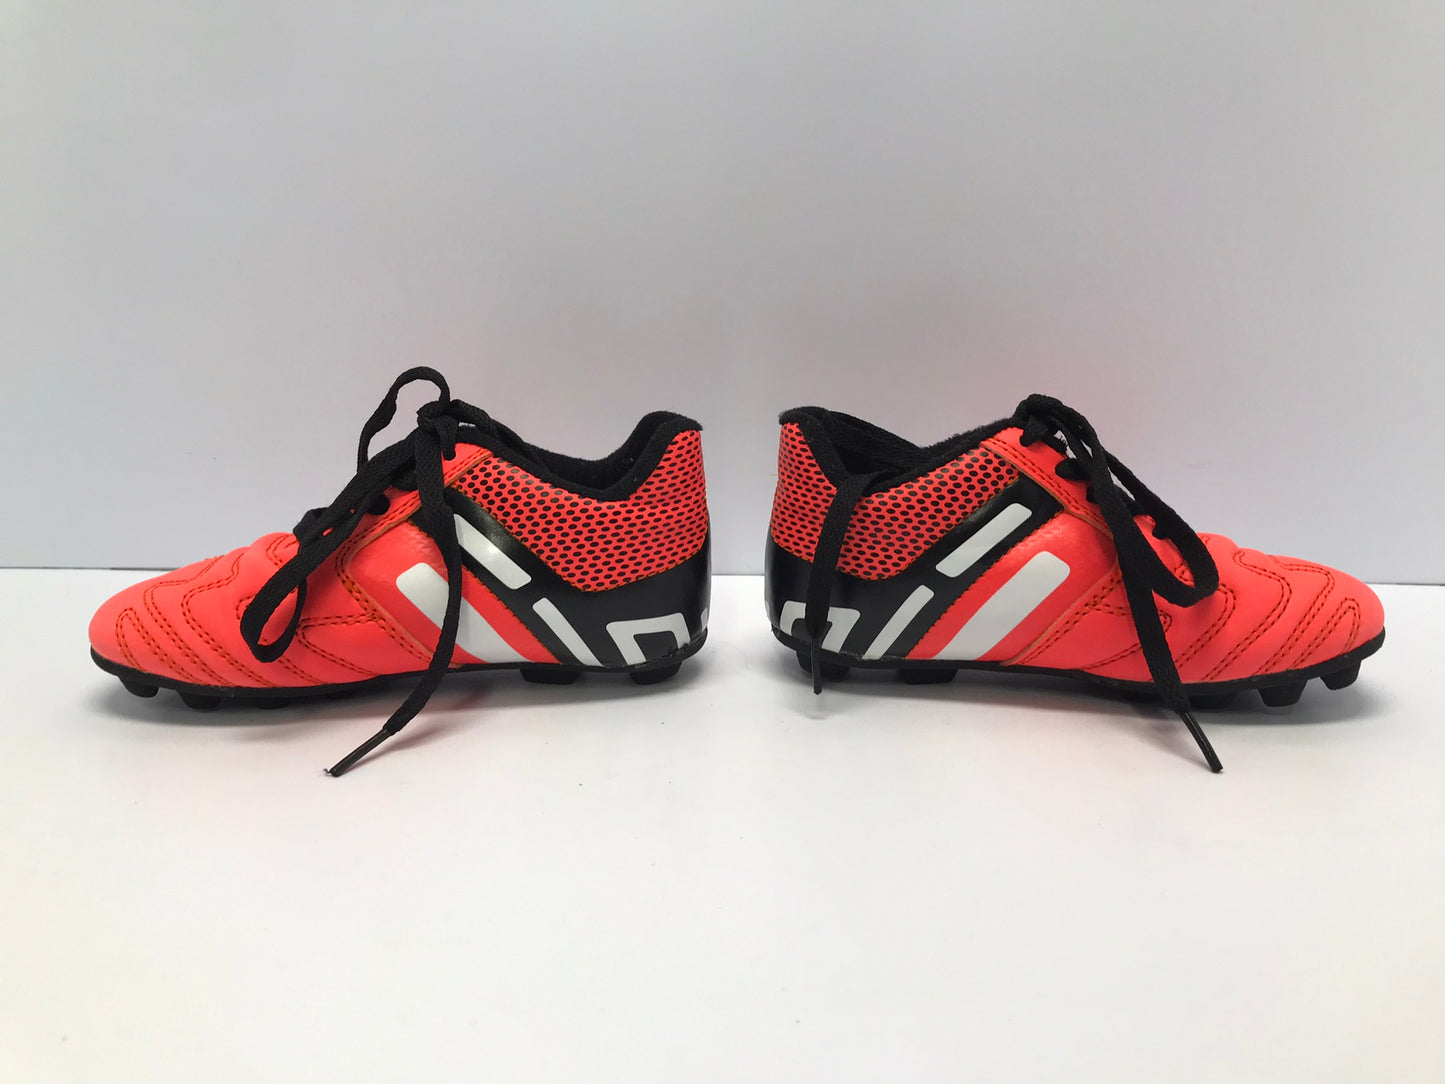 Soccer Shoes Cleats Child Size 10 Toddler Orange and Black Excellent